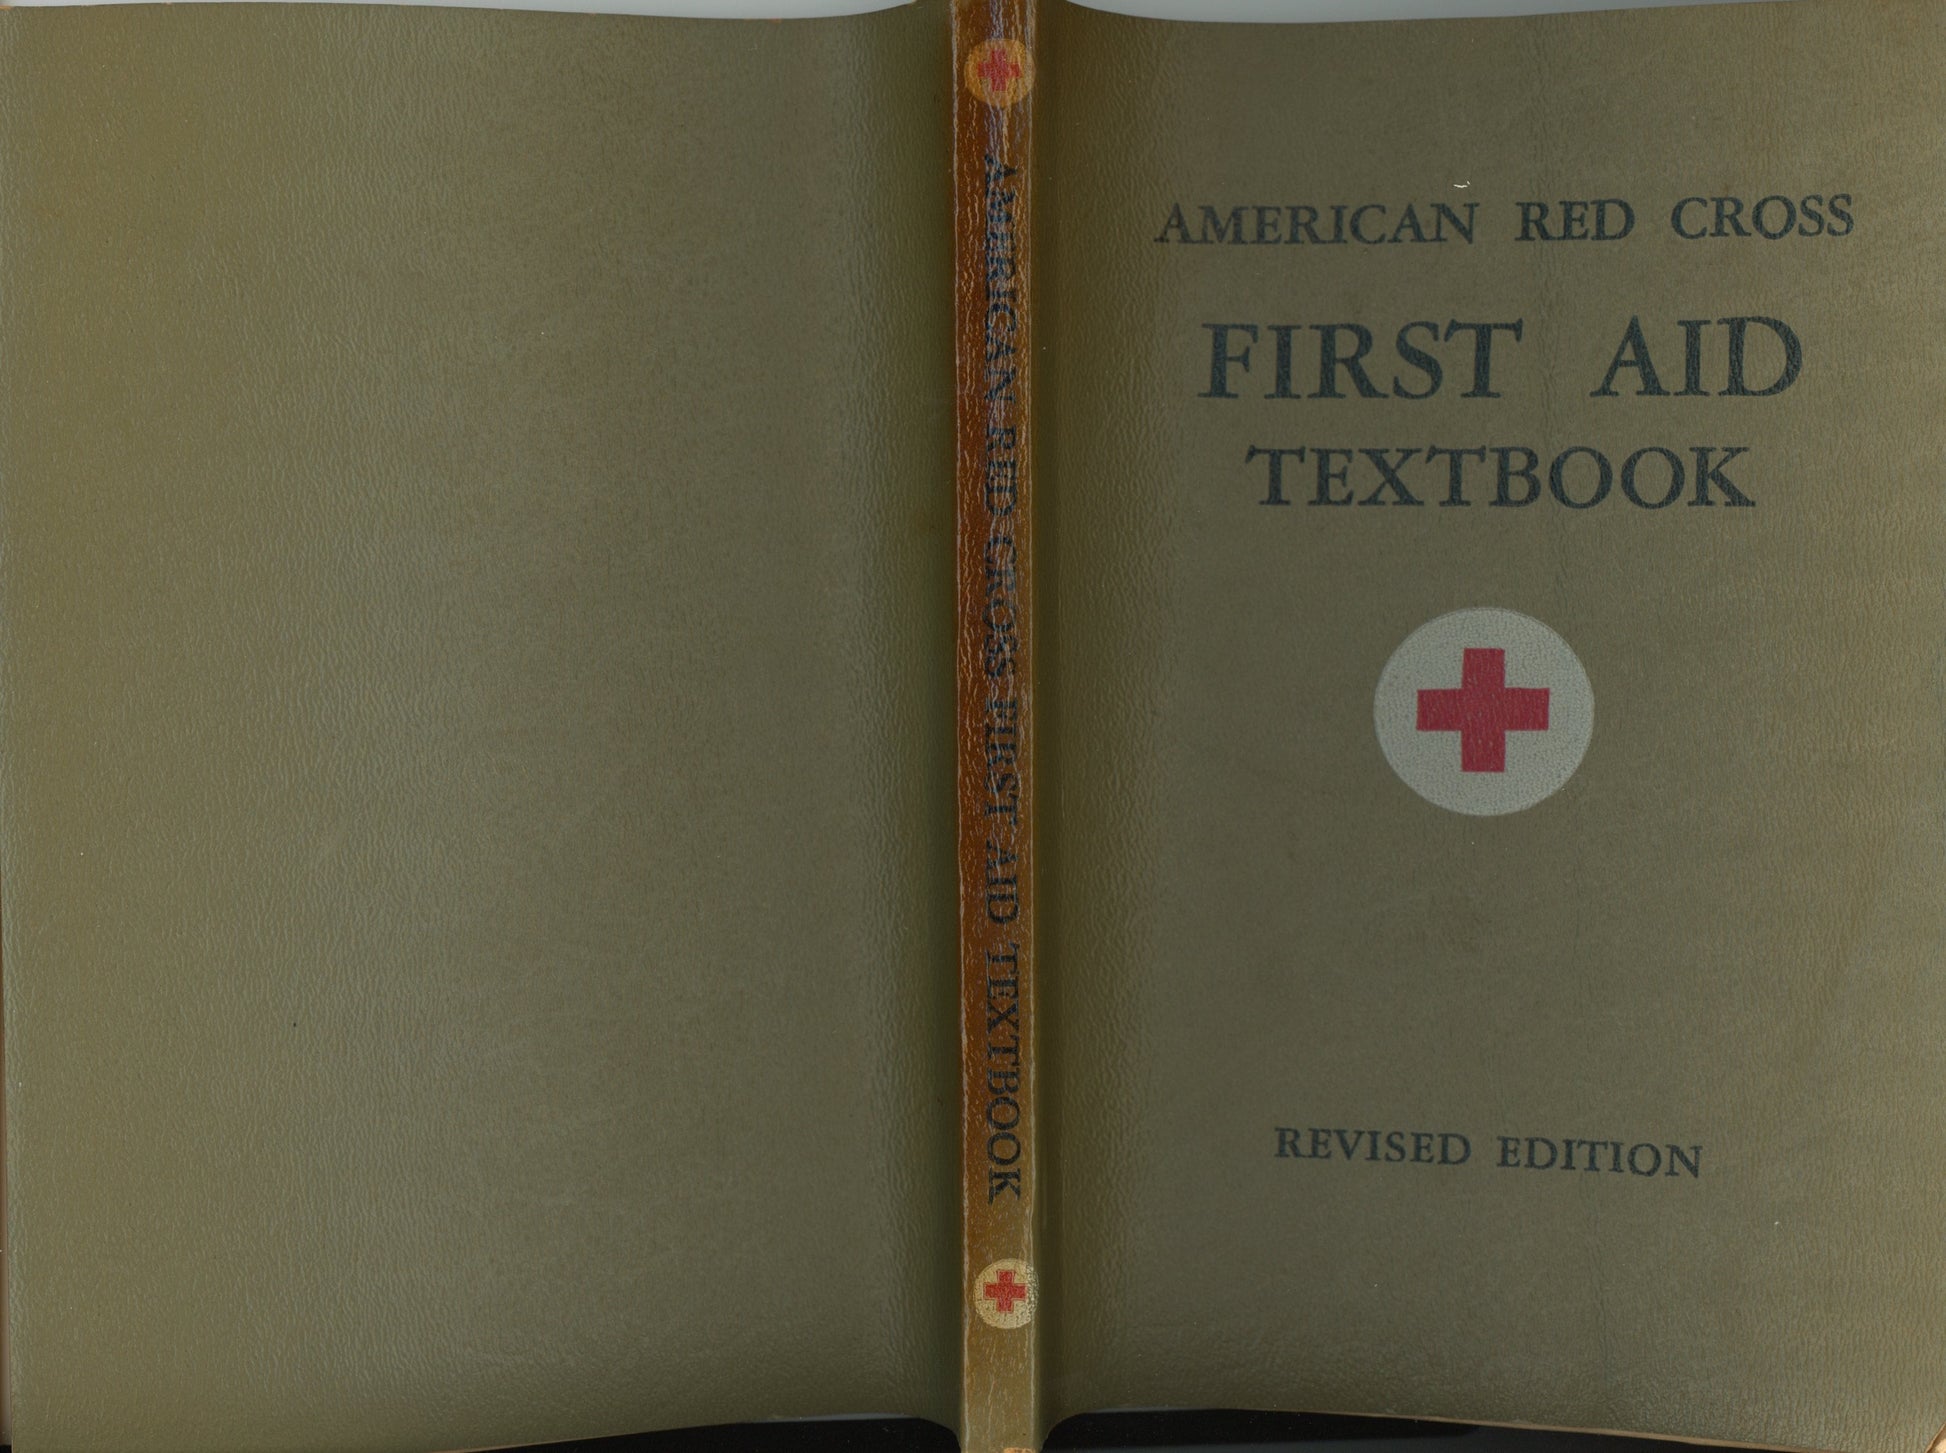 American Red Cross FIRST AID TEXTBOOK ©1933 1945